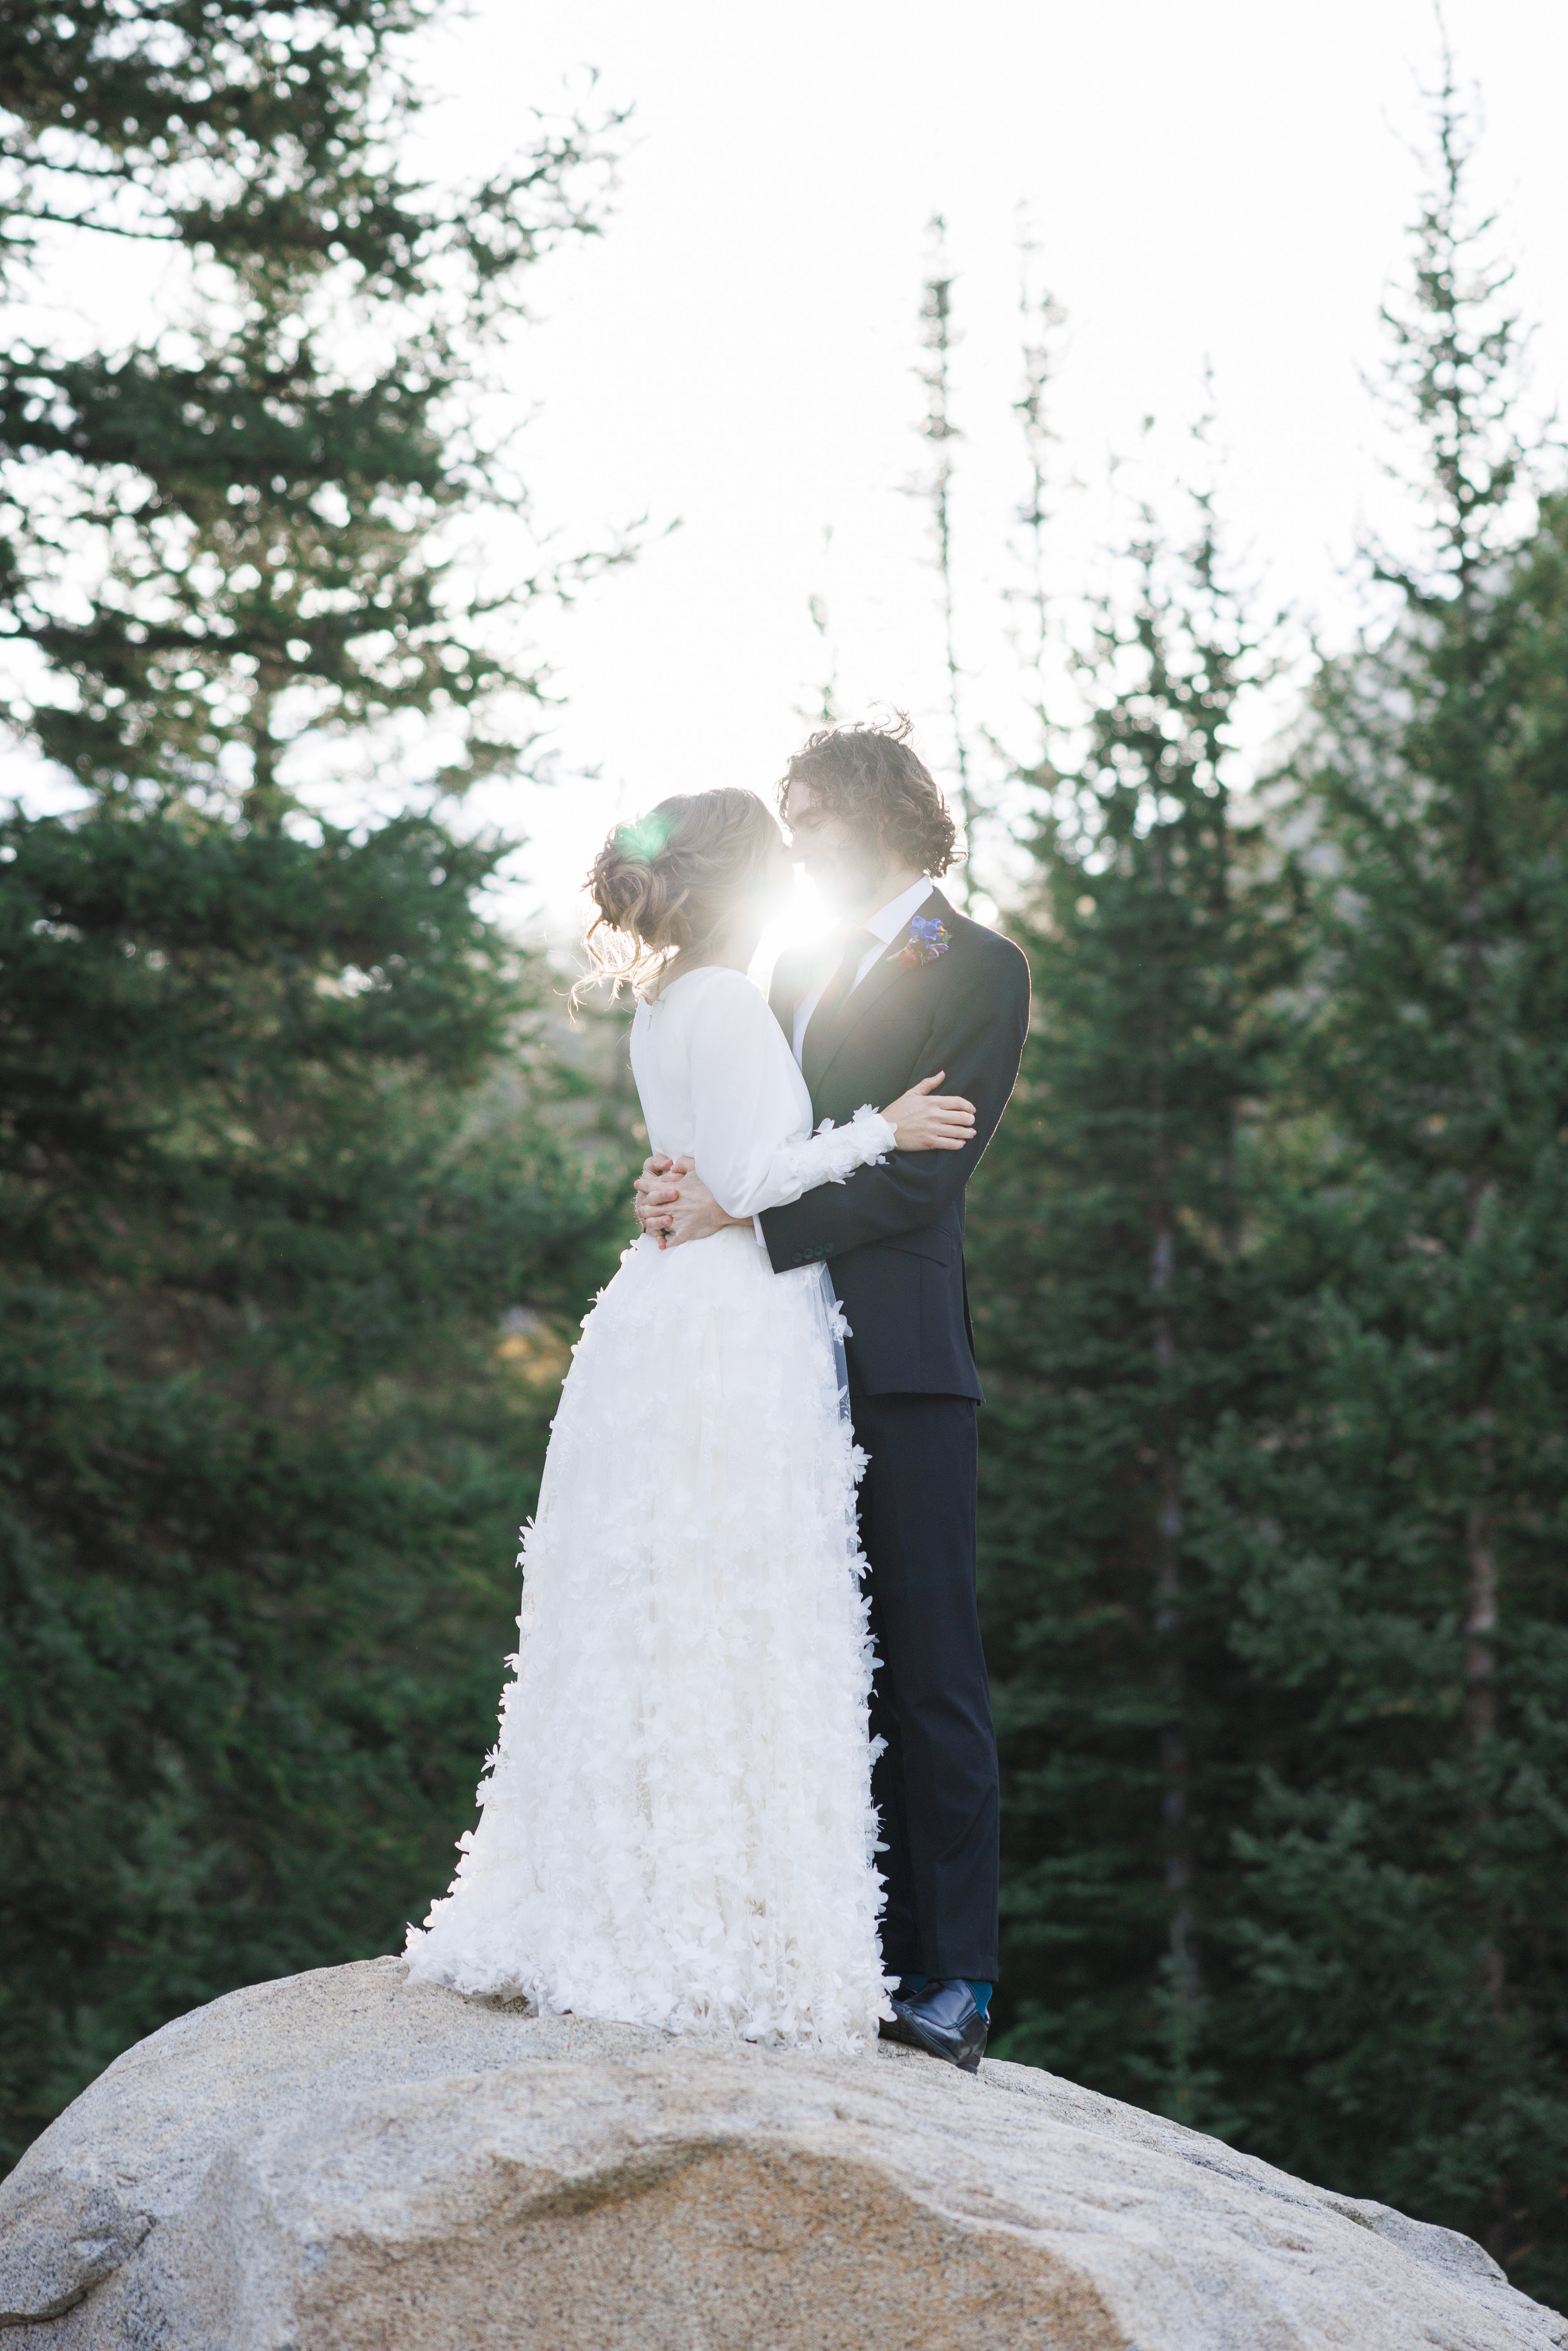  Standing on a rock the bride and groom kiss with the sun between them by Savanna Richardson Photography. pine tree bridals #SavannaRichardsonPhotography #SavannaRichardsonFormals #CottonwoodCanyon #WeddingFormals #SLCWedding #fallwed 